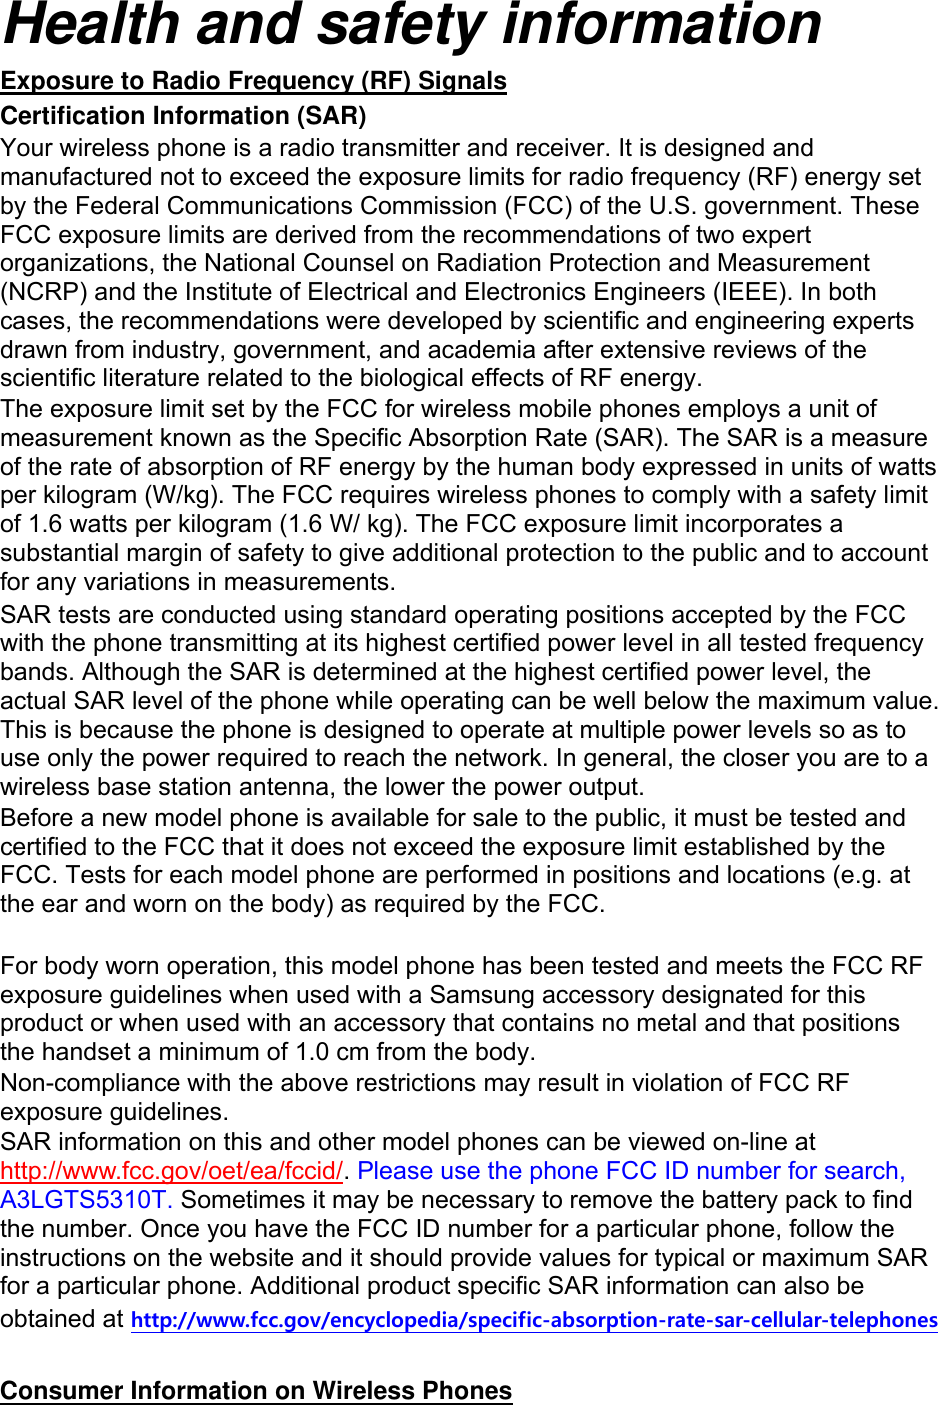 Health and safety information Exposure to Radio Frequency (RF) Signals Certification Information (SAR) Your wireless phone is a radio transmitter and receiver. It is designed and manufactured not to exceed the exposure limits for radio frequency (RF) energy set by the Federal Communications Commission (FCC) of the U.S. government. These FCC exposure limits are derived from the recommendations of two expert organizations, the National Counsel on Radiation Protection and Measurement (NCRP) and the Institute of Electrical and Electronics Engineers (IEEE). In both cases, the recommendations were developed by scientific and engineering experts drawn from industry, government, and academia after extensive reviews of the scientific literature related to the biological effects of RF energy. The exposure limit set by the FCC for wireless mobile phones employs a unit of measurement known as the Specific Absorption Rate (SAR). The SAR is a measure of the rate of absorption of RF energy by the human body expressed in units of watts per kilogram (W/kg). The FCC requires wireless phones to comply with a safety limit of 1.6 watts per kilogram (1.6 W/ kg). The FCC exposure limit incorporates a substantial margin of safety to give additional protection to the public and to account for any variations in measurements. SAR tests are conducted using standard operating positions accepted by the FCC with the phone transmitting at its highest certified power level in all tested frequency bands. Although the SAR is determined at the highest certified power level, the actual SAR level of the phone while operating can be well below the maximum value. This is because the phone is designed to operate at multiple power levels so as to use only the power required to reach the network. In general, the closer you are to a wireless base station antenna, the lower the power output. Before a new model phone is available for sale to the public, it must be tested and certified to the FCC that it does not exceed the exposure limit established by the FCC. Tests for each model phone are performed in positions and locations (e.g. at the ear and worn on the body) as required by the FCC.      For body worn operation, this model phone has been tested and meets the FCC RF exposure guidelines when used with a Samsung accessory designated for this product or when used with an accessory that contains no metal and that positions the handset a minimum of 1.0 cm from the body.   Non-compliance with the above restrictions may result in violation of FCC RF exposure guidelines. SAR information on this and other model phones can be viewed on-line at http://www.fcc.gov/oet/ea/fccid/. Please use the phone FCC ID number for search, A3LGTS5310T. Sometimes it may be necessary to remove the battery pack to find the number. Once you have the FCC ID number for a particular phone, follow the instructions on the website and it should provide values for typical or maximum SAR for a particular phone. Additional product specific SAR information can also be obtained at http://www.fcc.gov/encyclopedia/specific-absorption-rate-sar-cellular-telephones  Consumer Information on Wireless Phones 